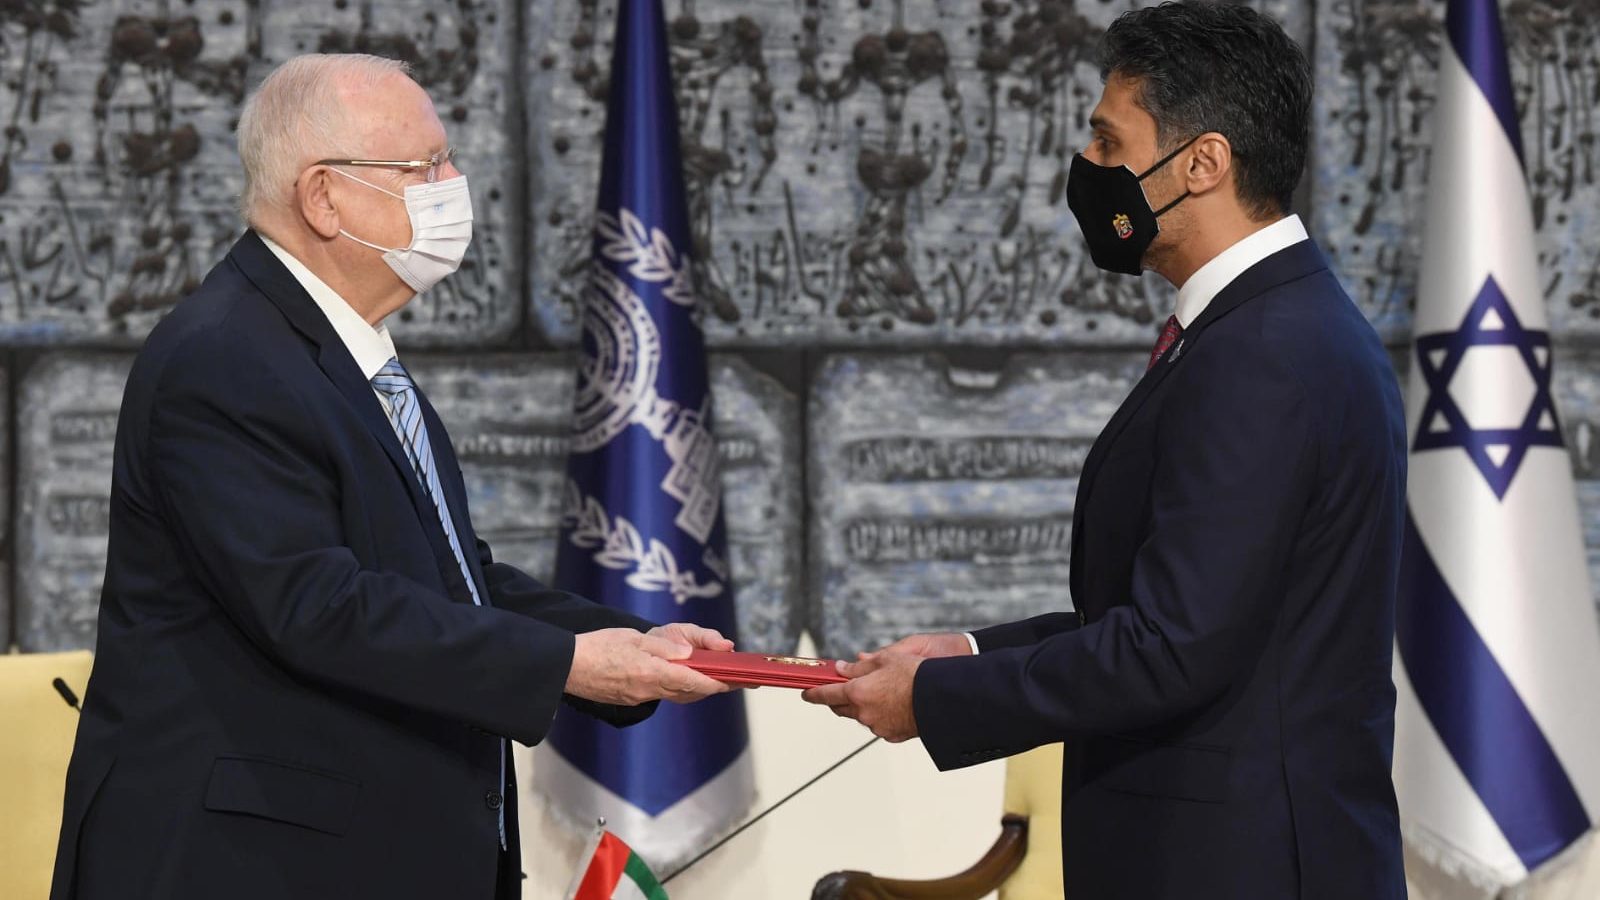 First UAE Envoy Presents Credentials to Israel’s President